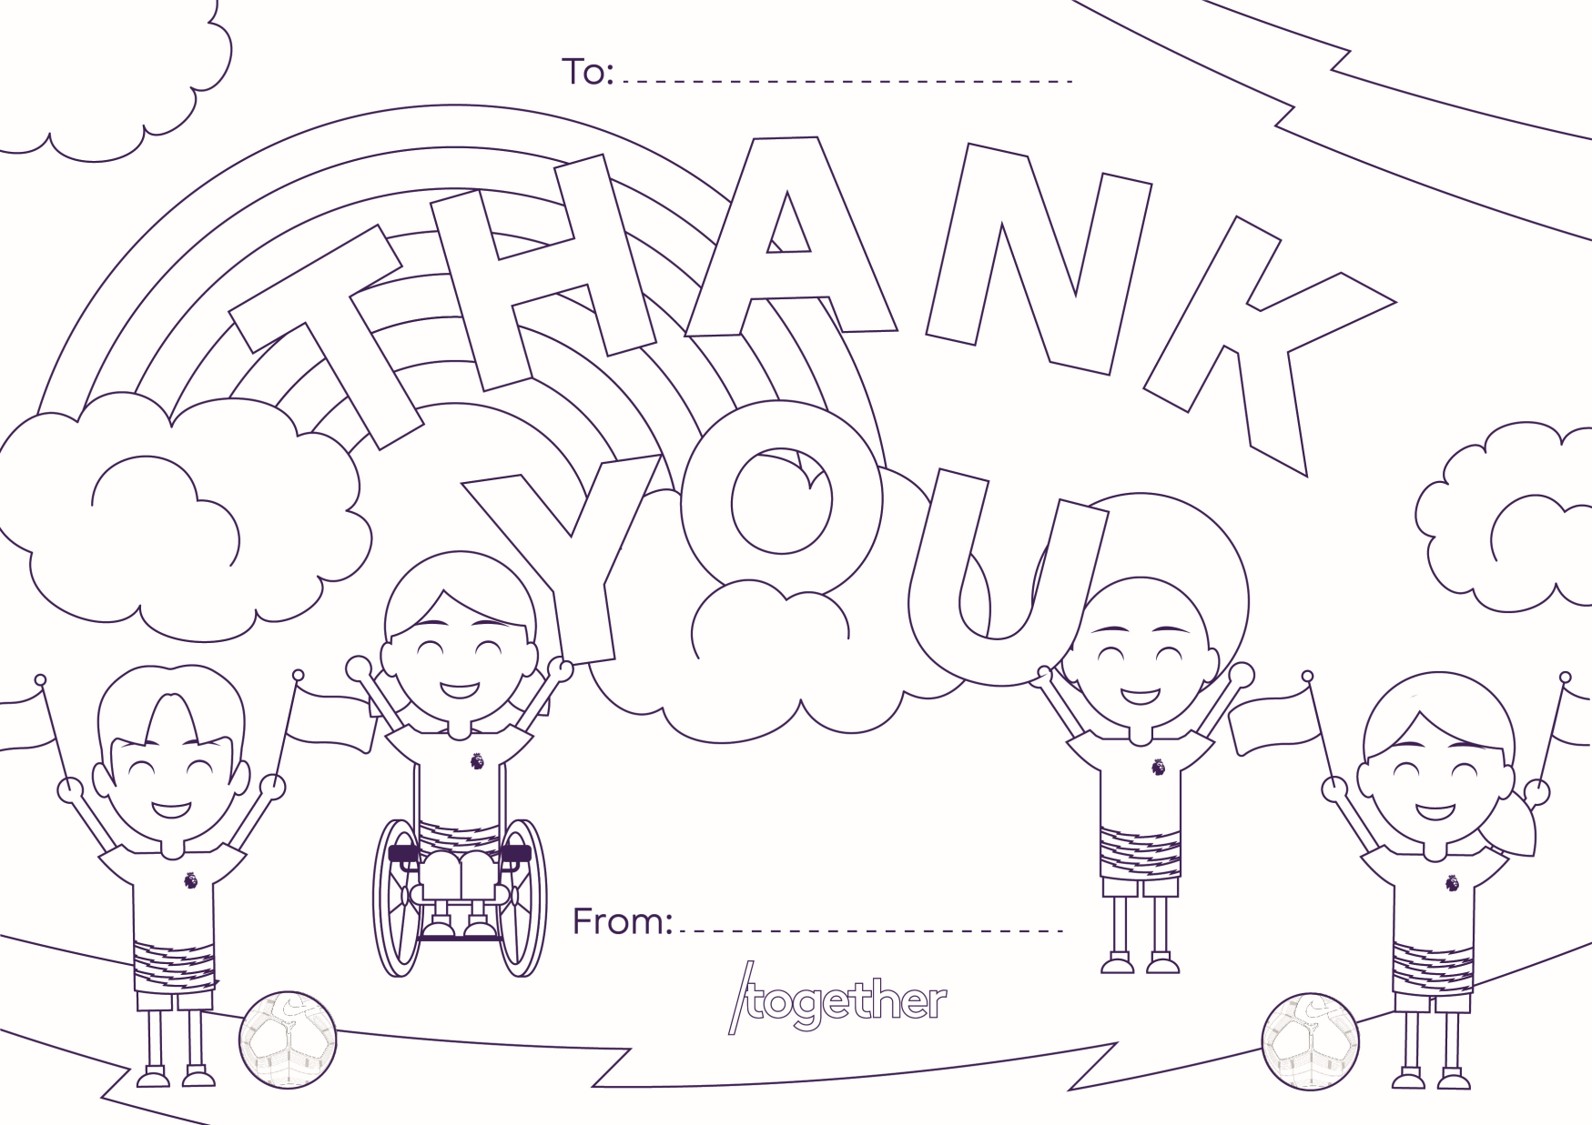 'Thank you' template with children and footballs